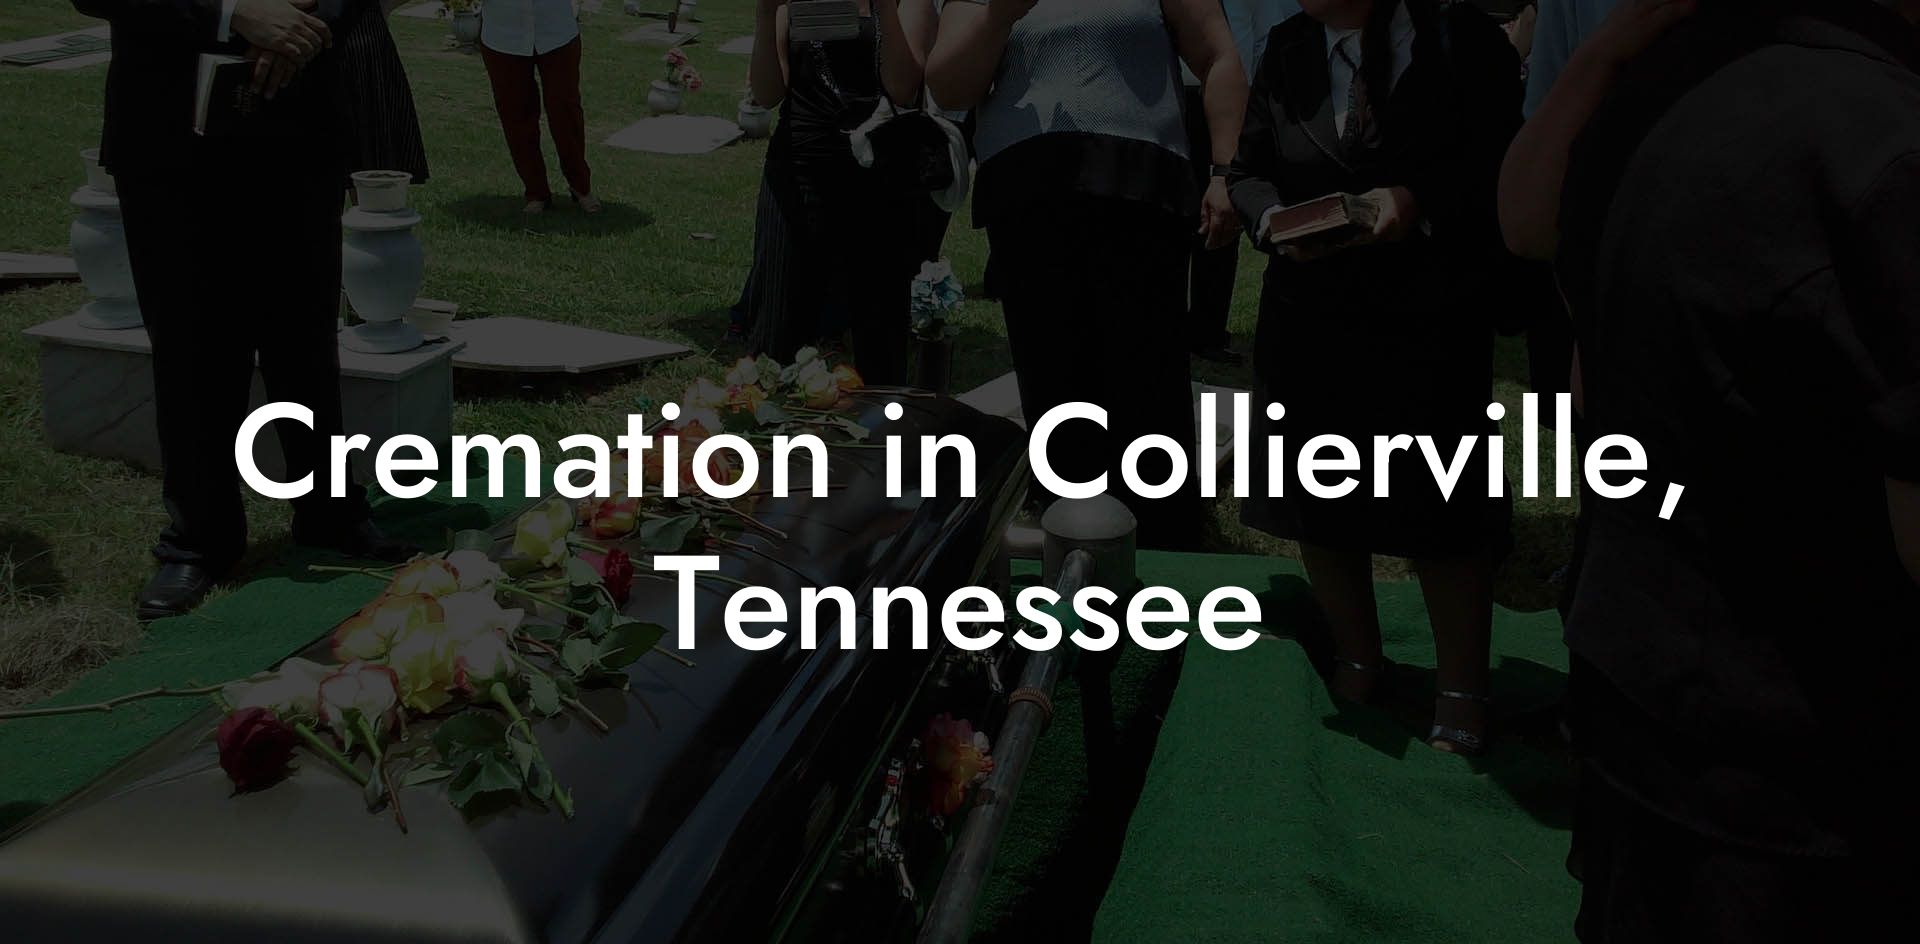 Cremation in Collierville, Tennessee